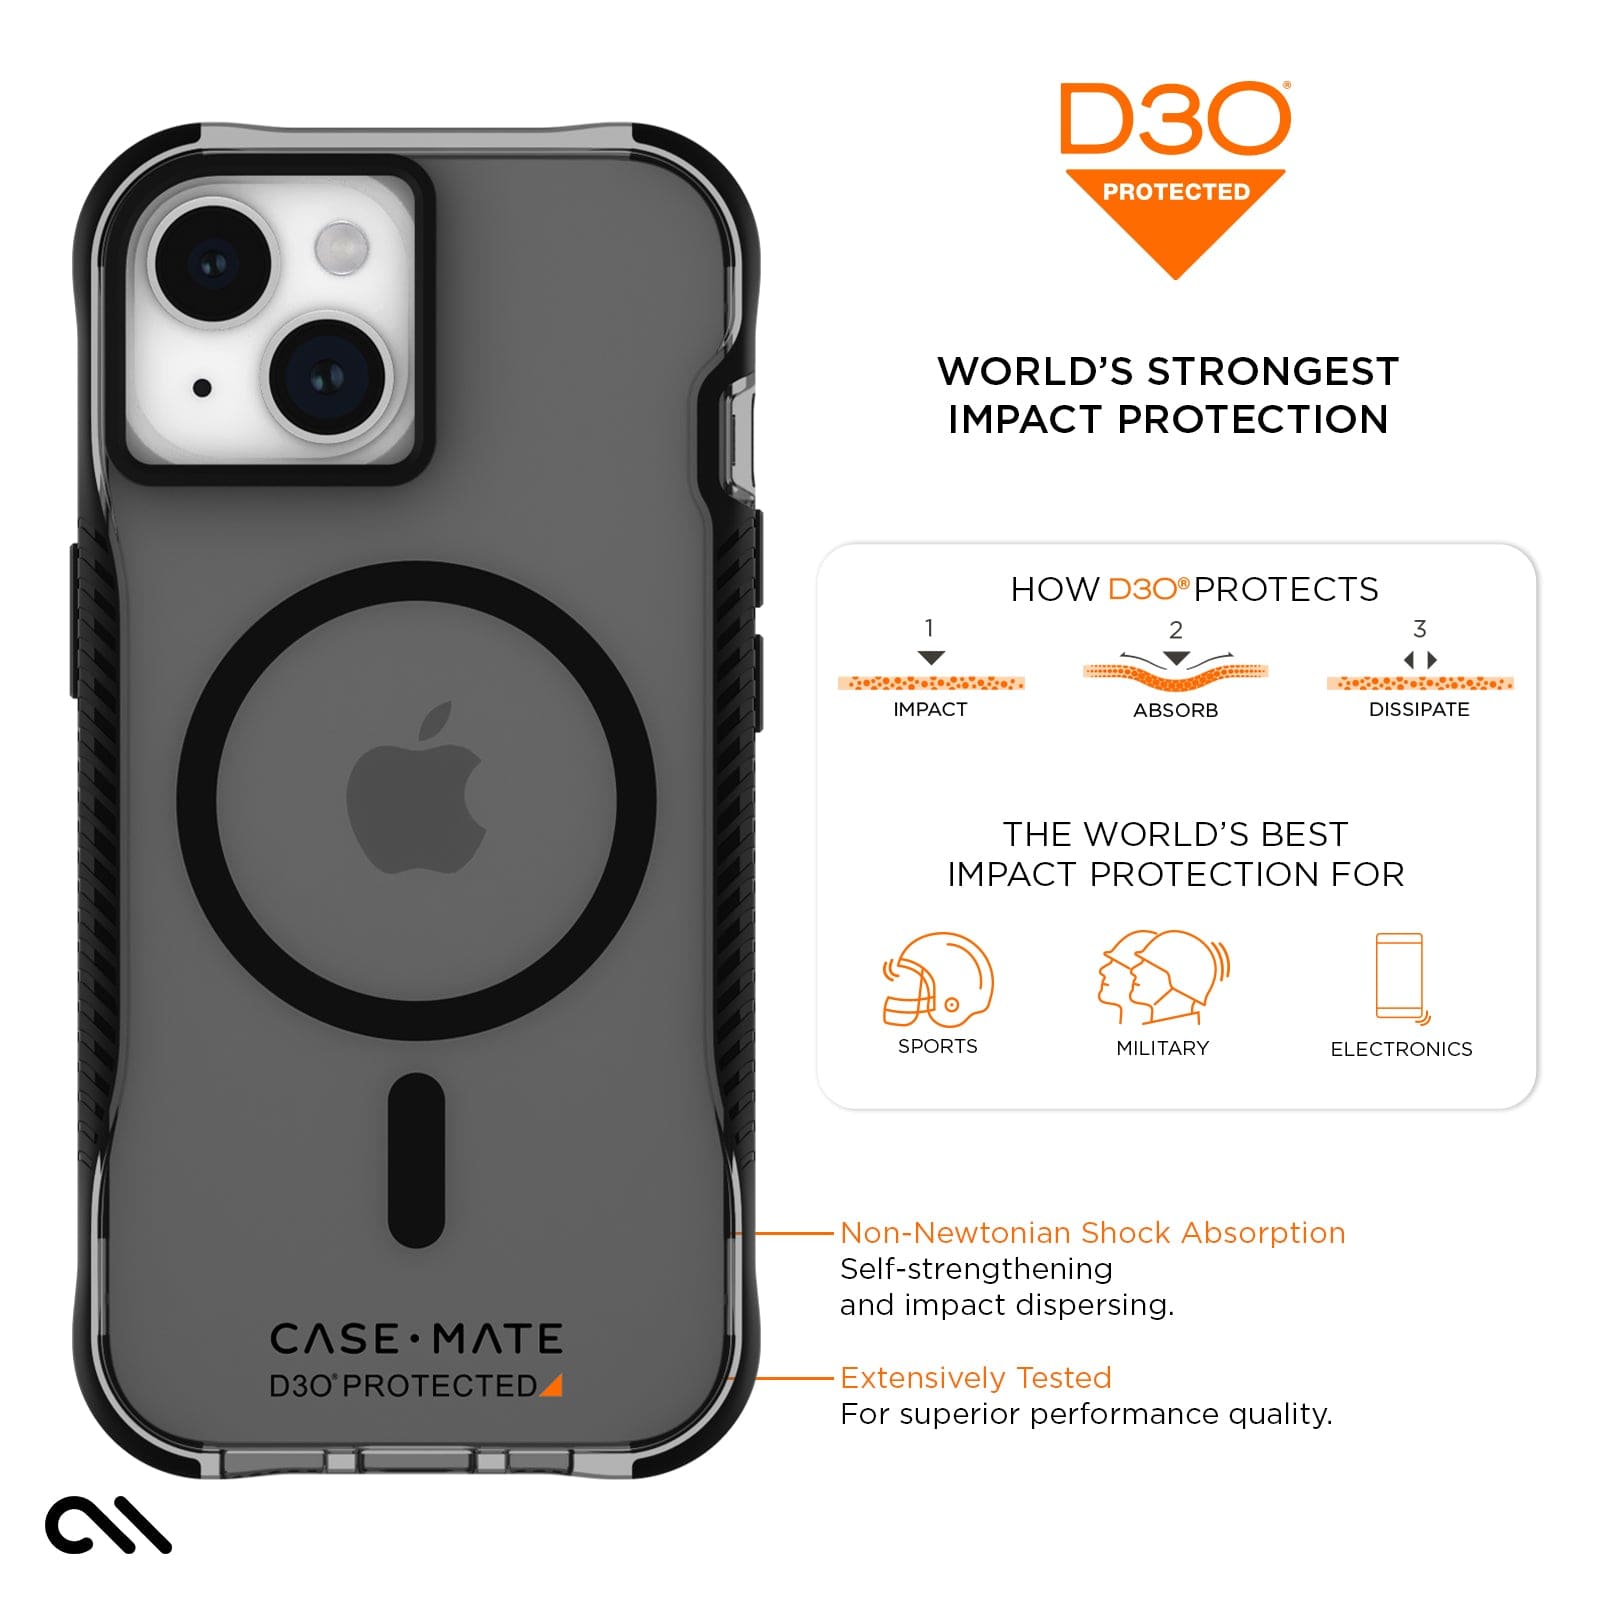 D3O PROTECTED. WORLDS STRONGEST IMPACT PROTECTION